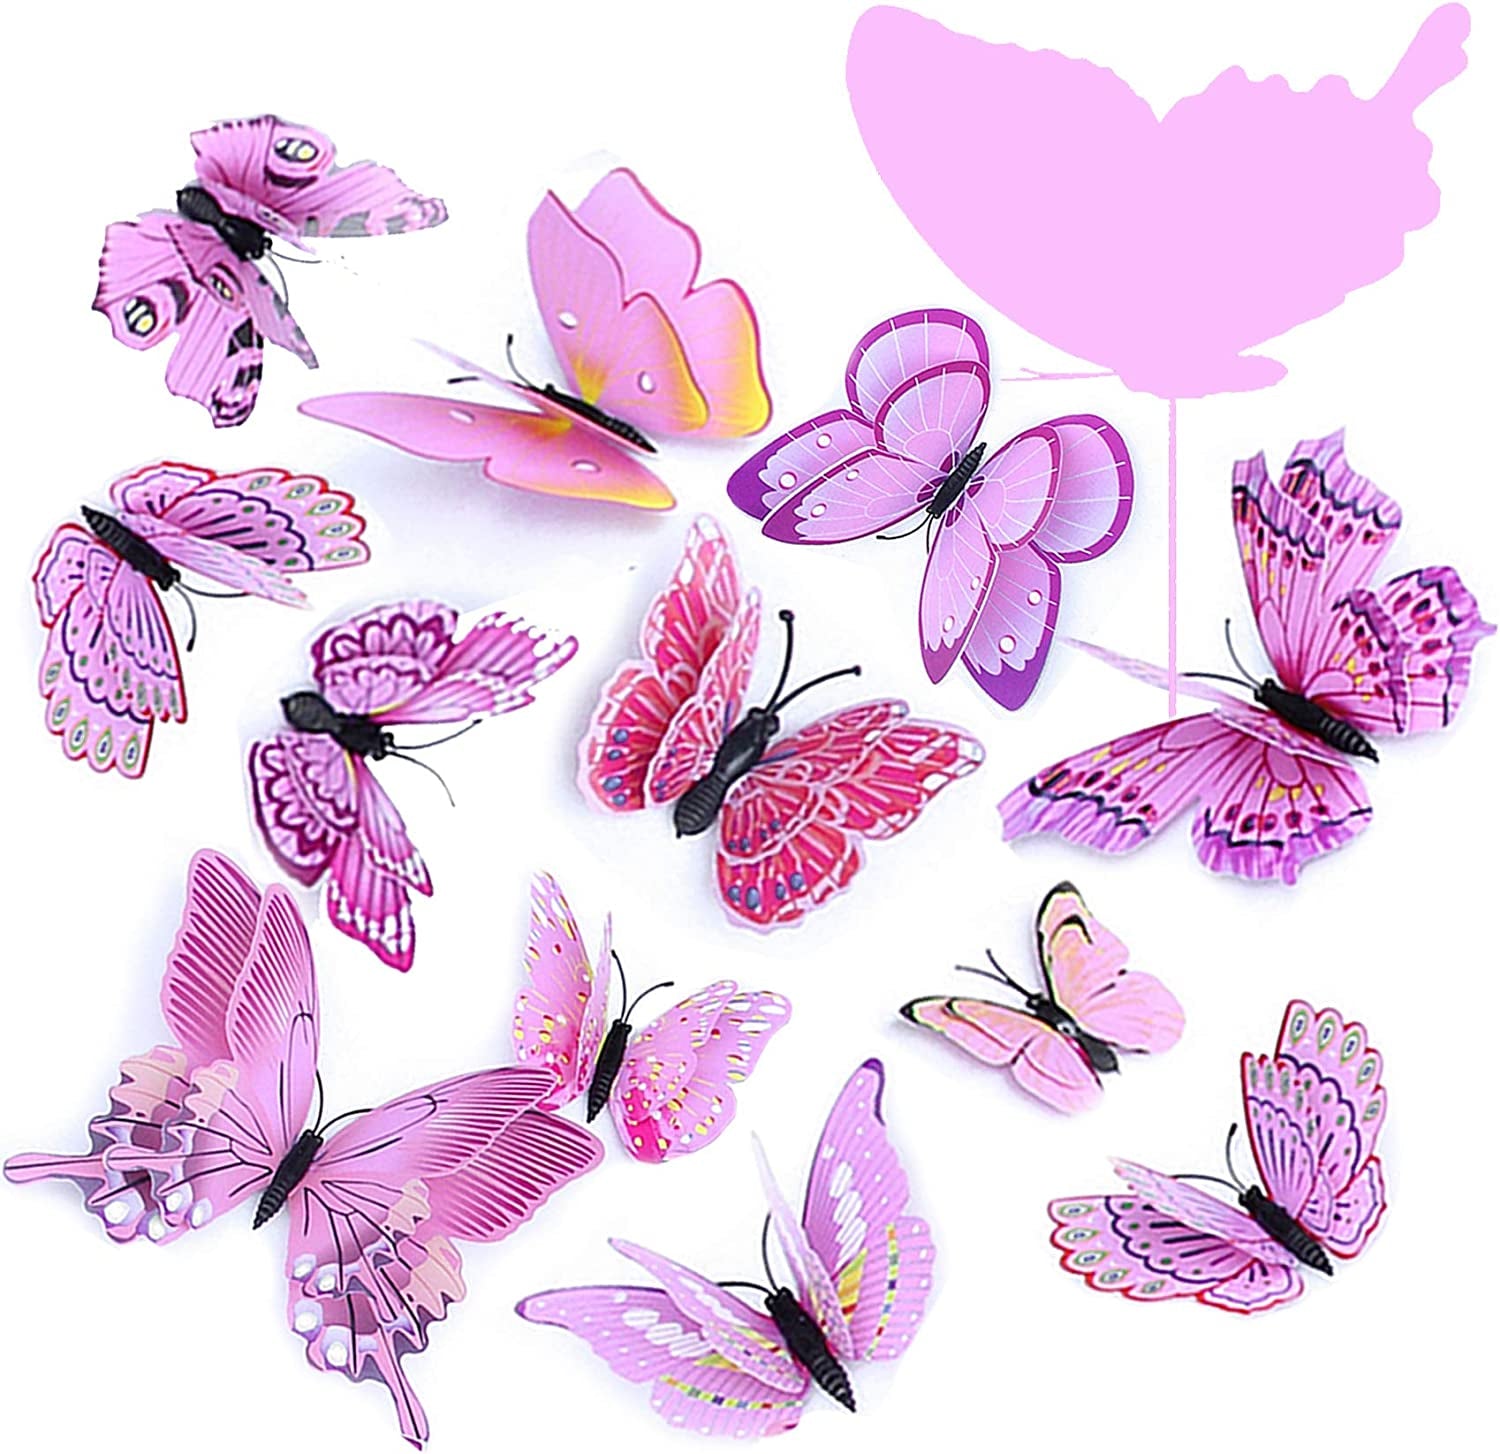 FENELY, FENELY Butterfly Garden Decor Stakes,Double Wing Waterproof 3D Pink Butterflies Garden Ornaments Outdoor Decorations for Patio Lawn Yard PVC Gardening Art Christmas Whimsical Gifts